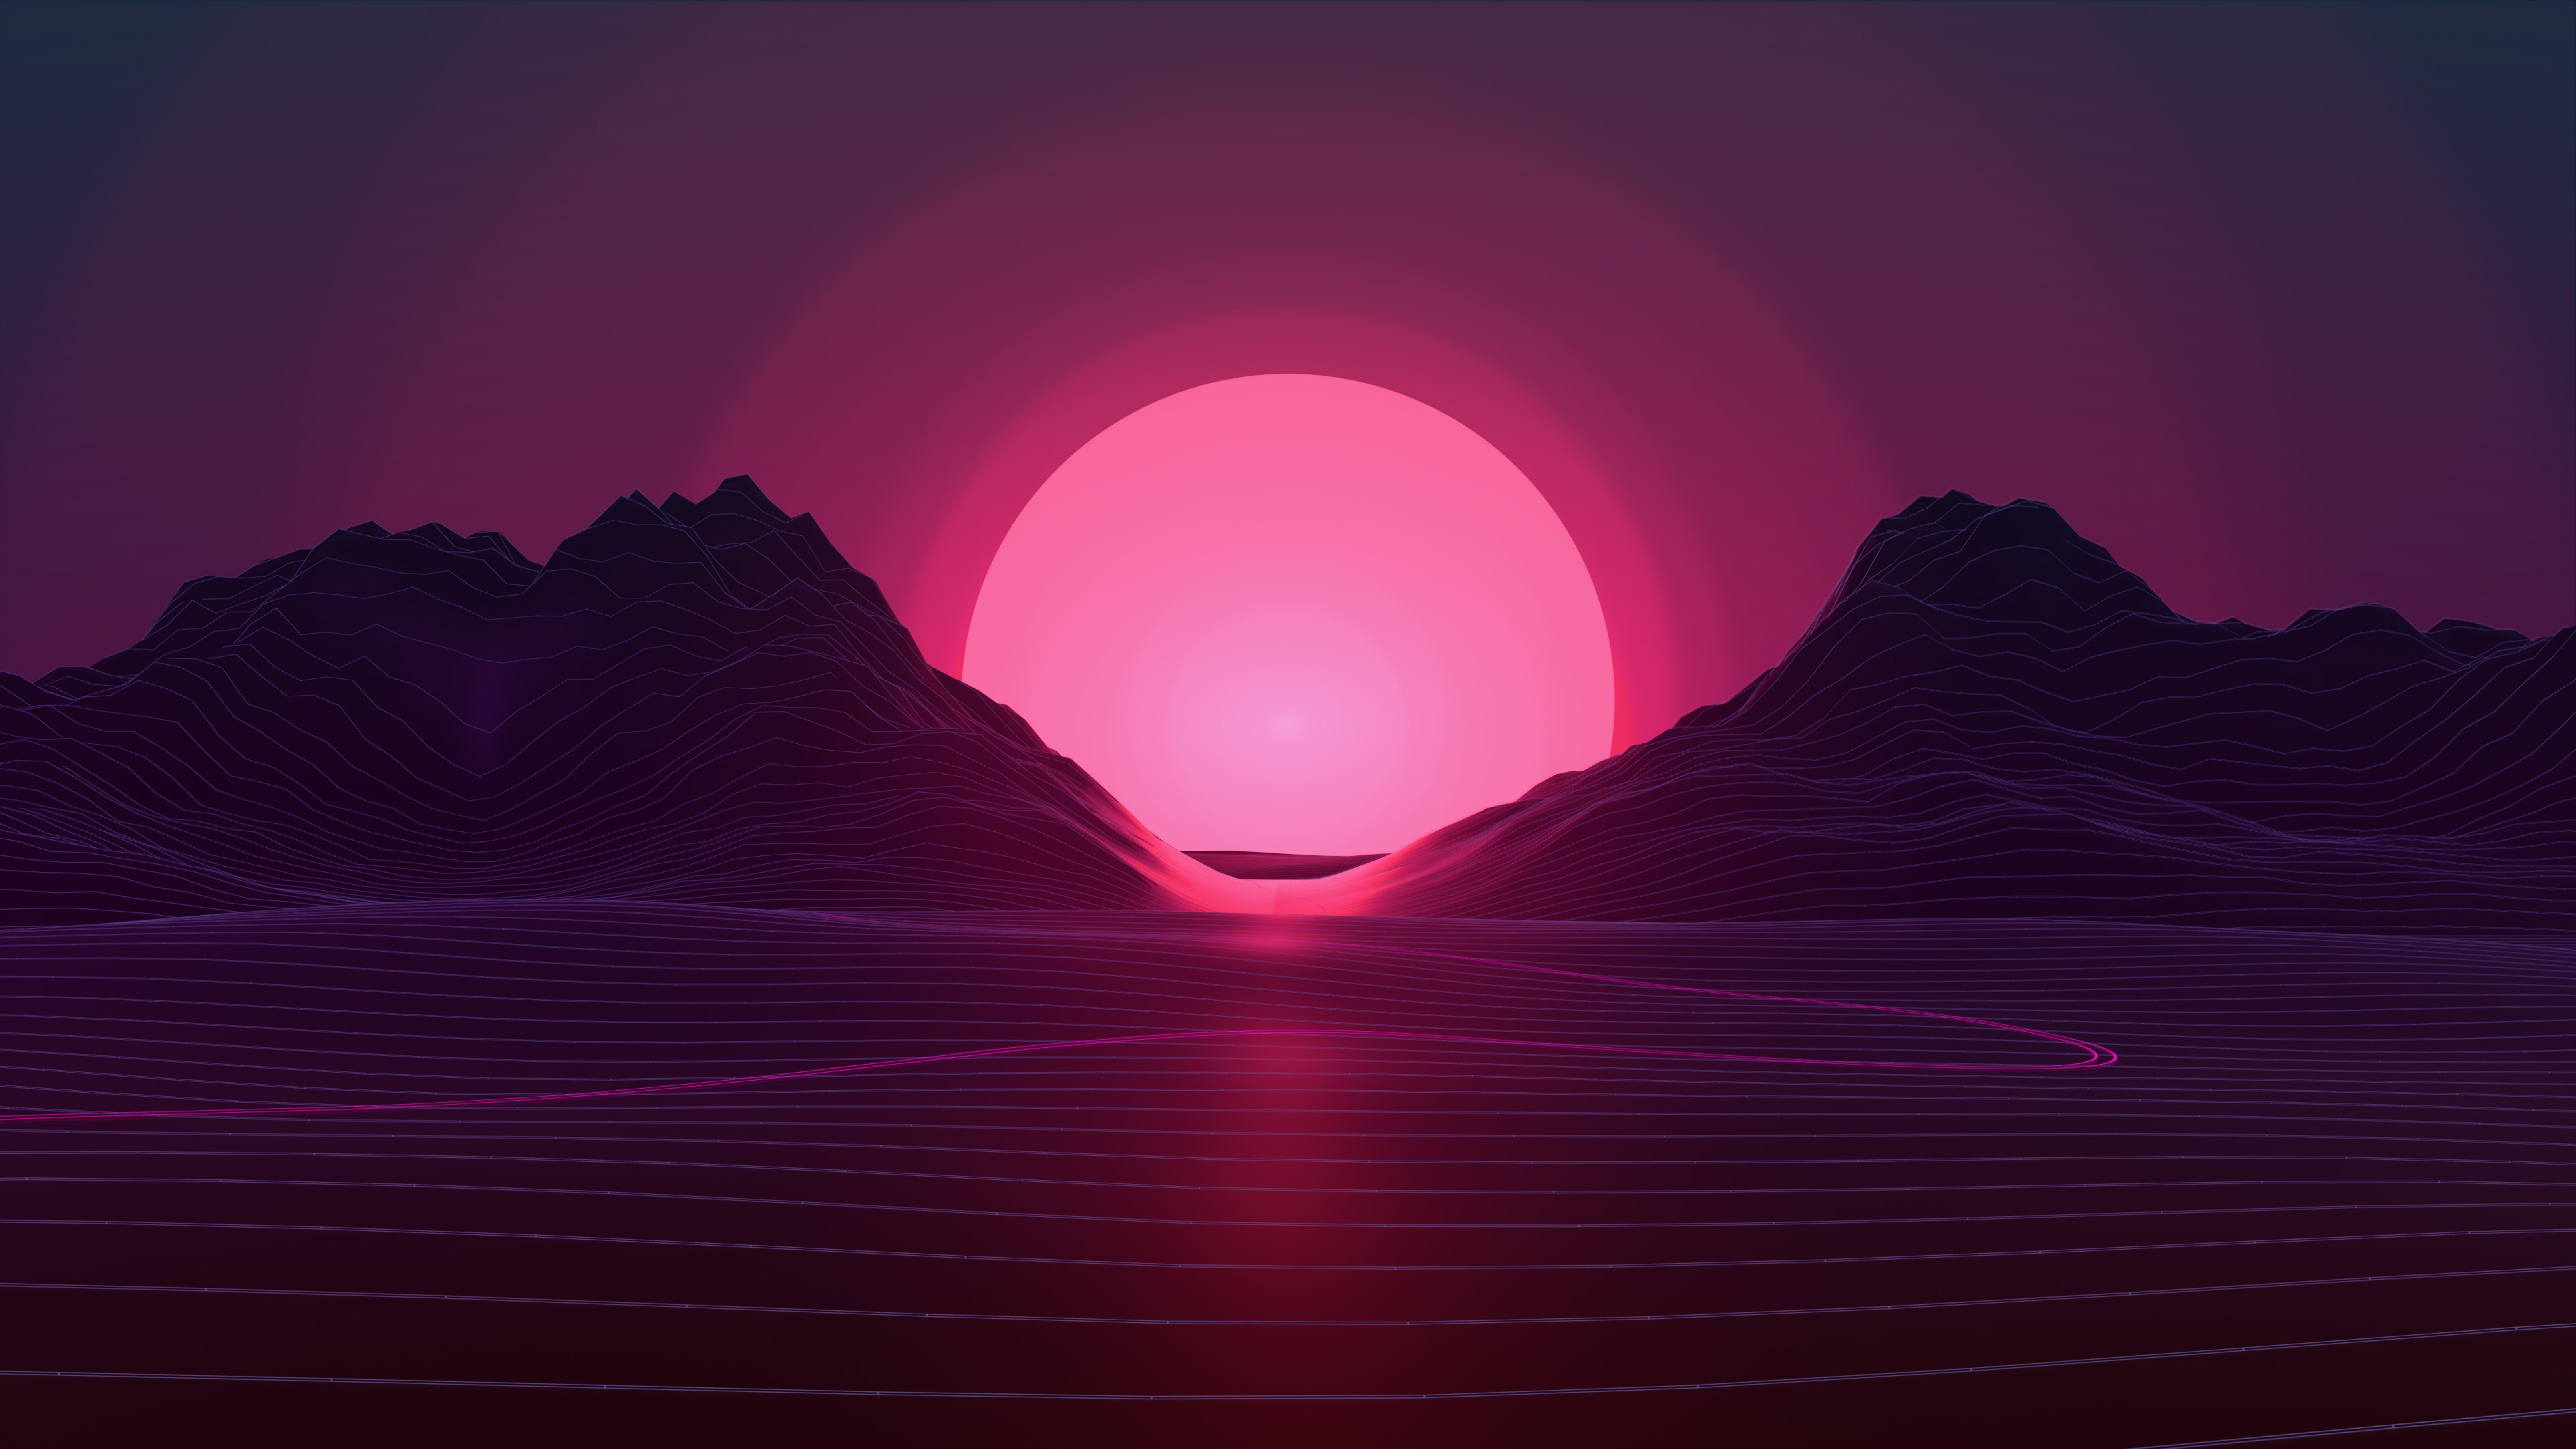 Retrowave 4K wallpapers for your desktop or mobile screen free and easy to  download